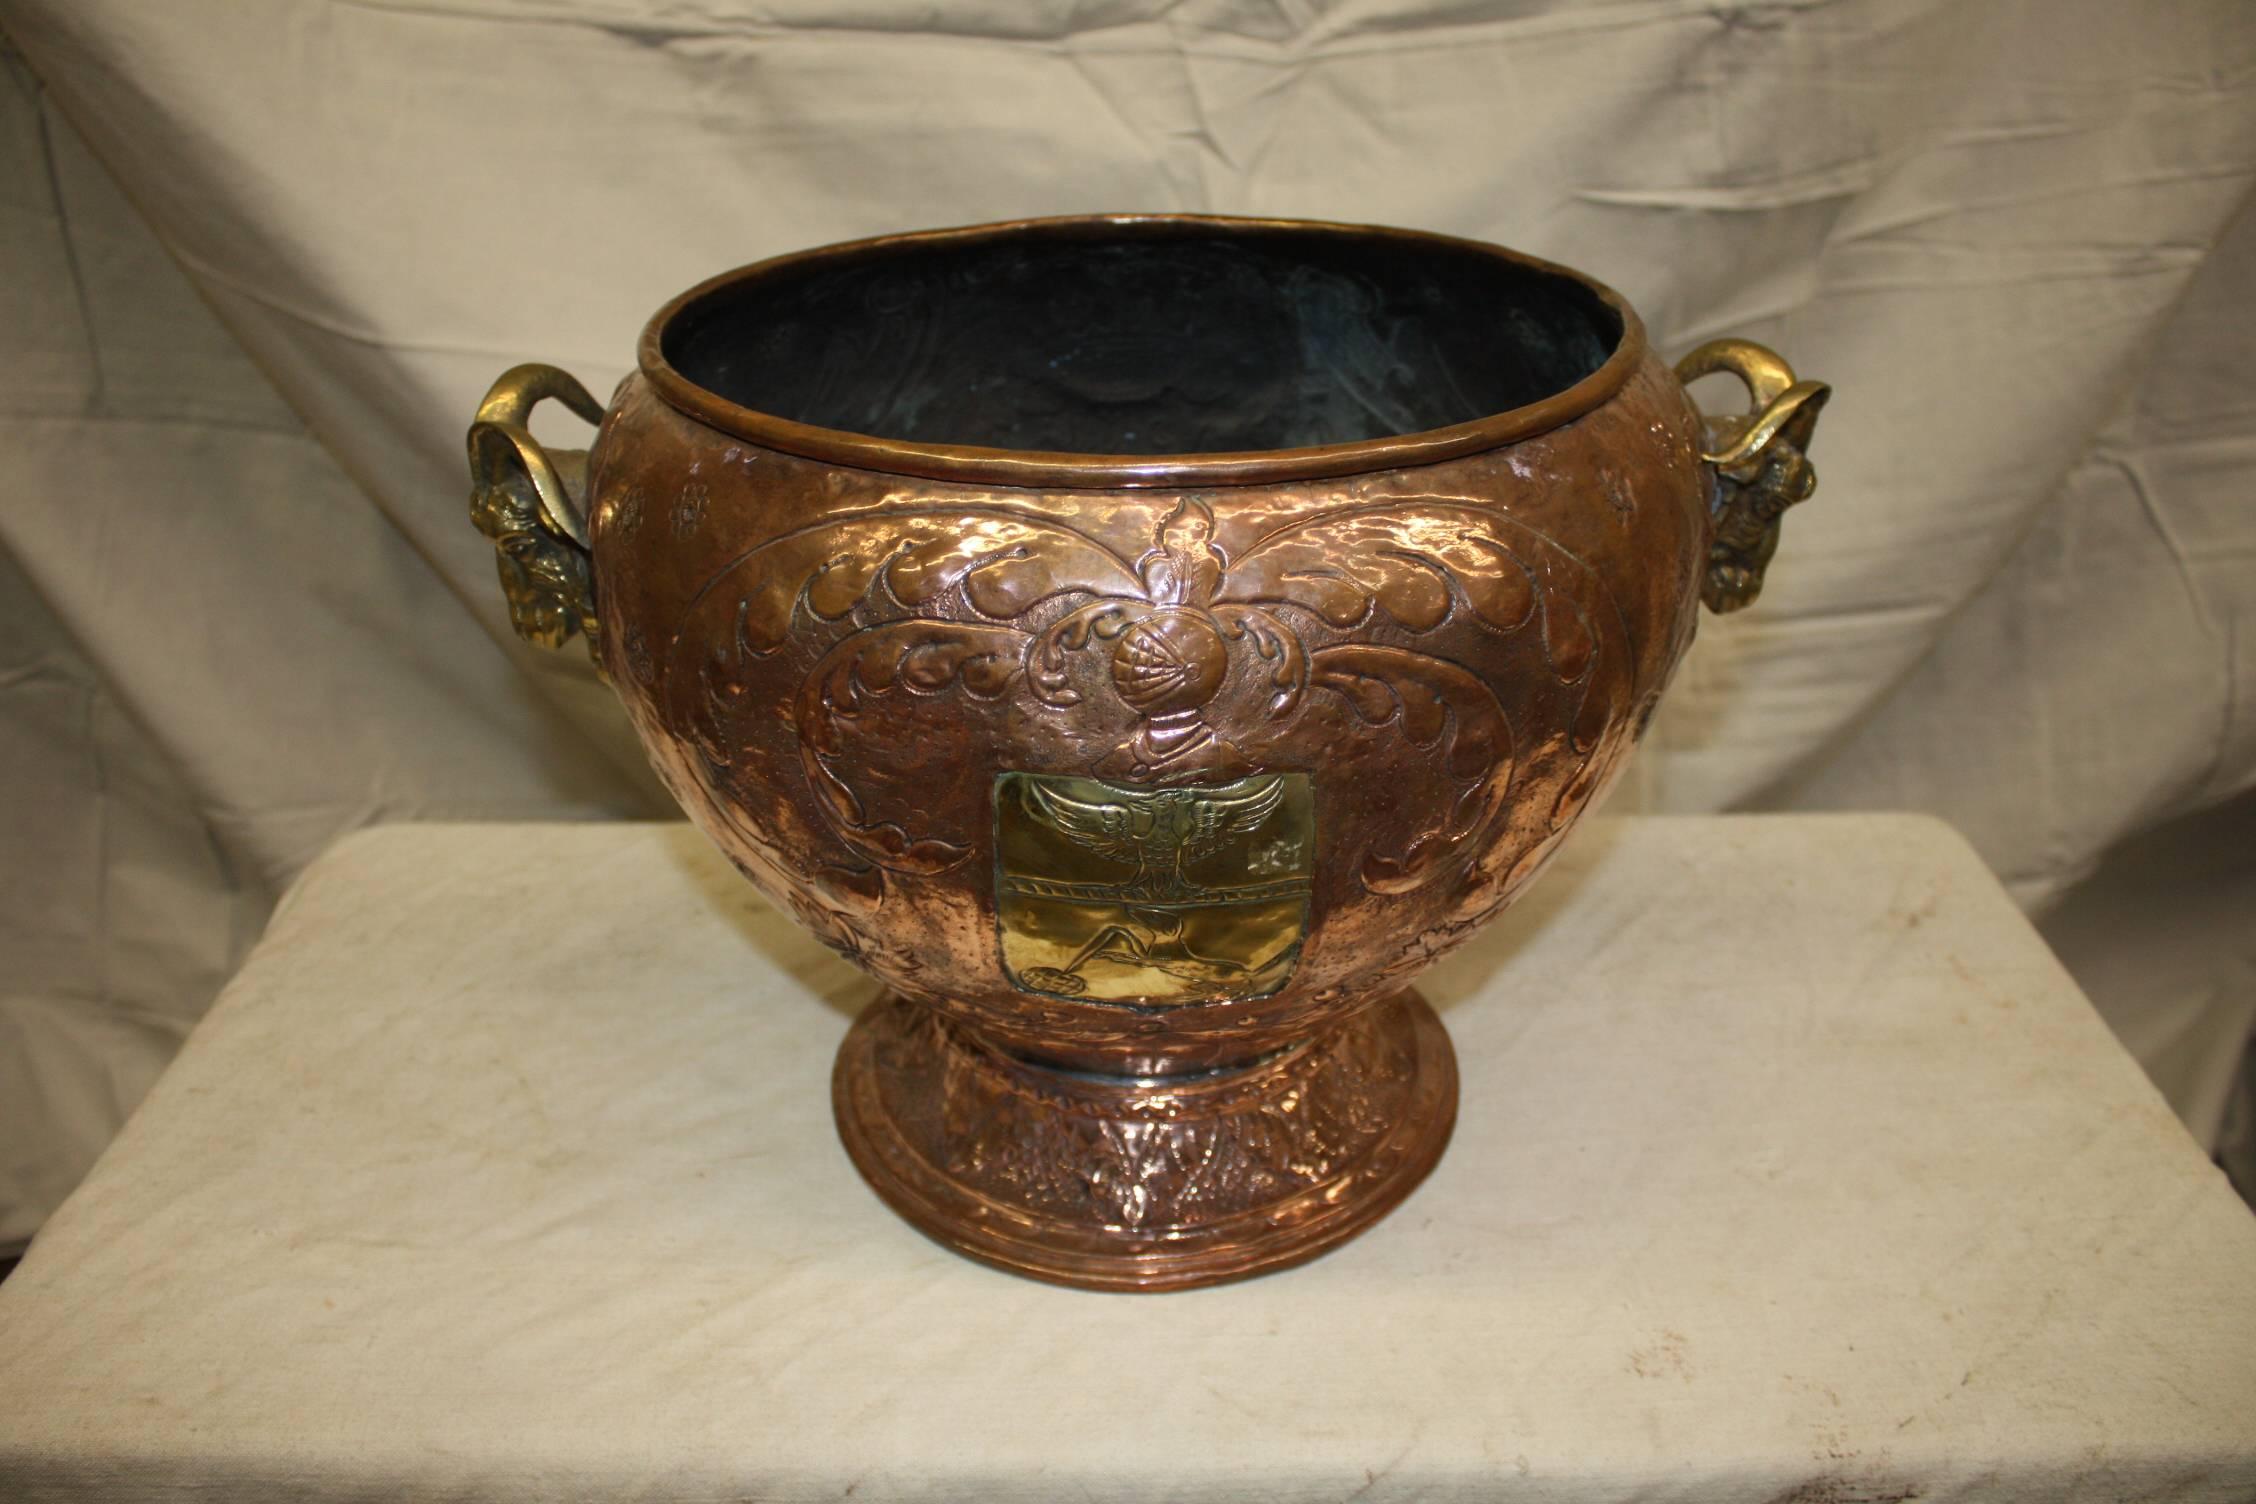 Beautiful 19th century French copper urn.